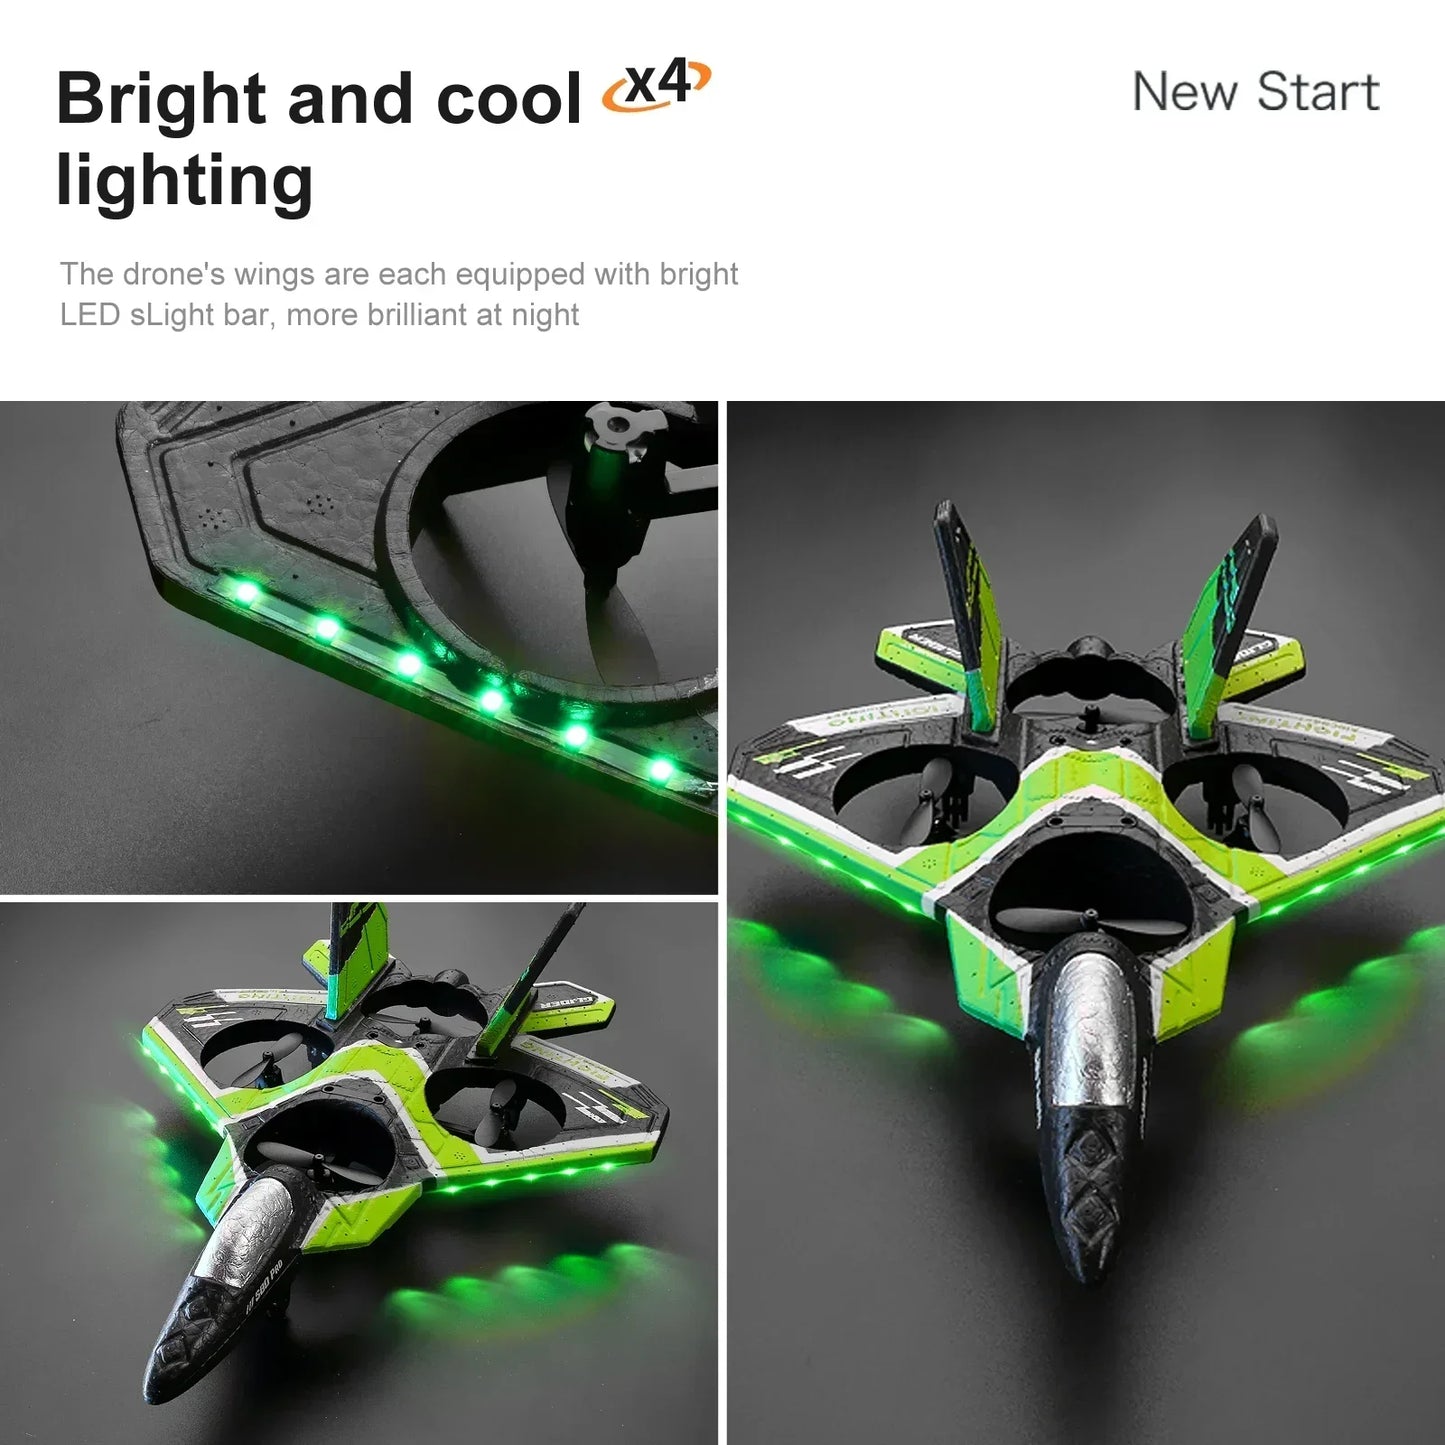 RC Foam Glider Aircraft with LED Lights - Remote Control Airplane Toy for Boys